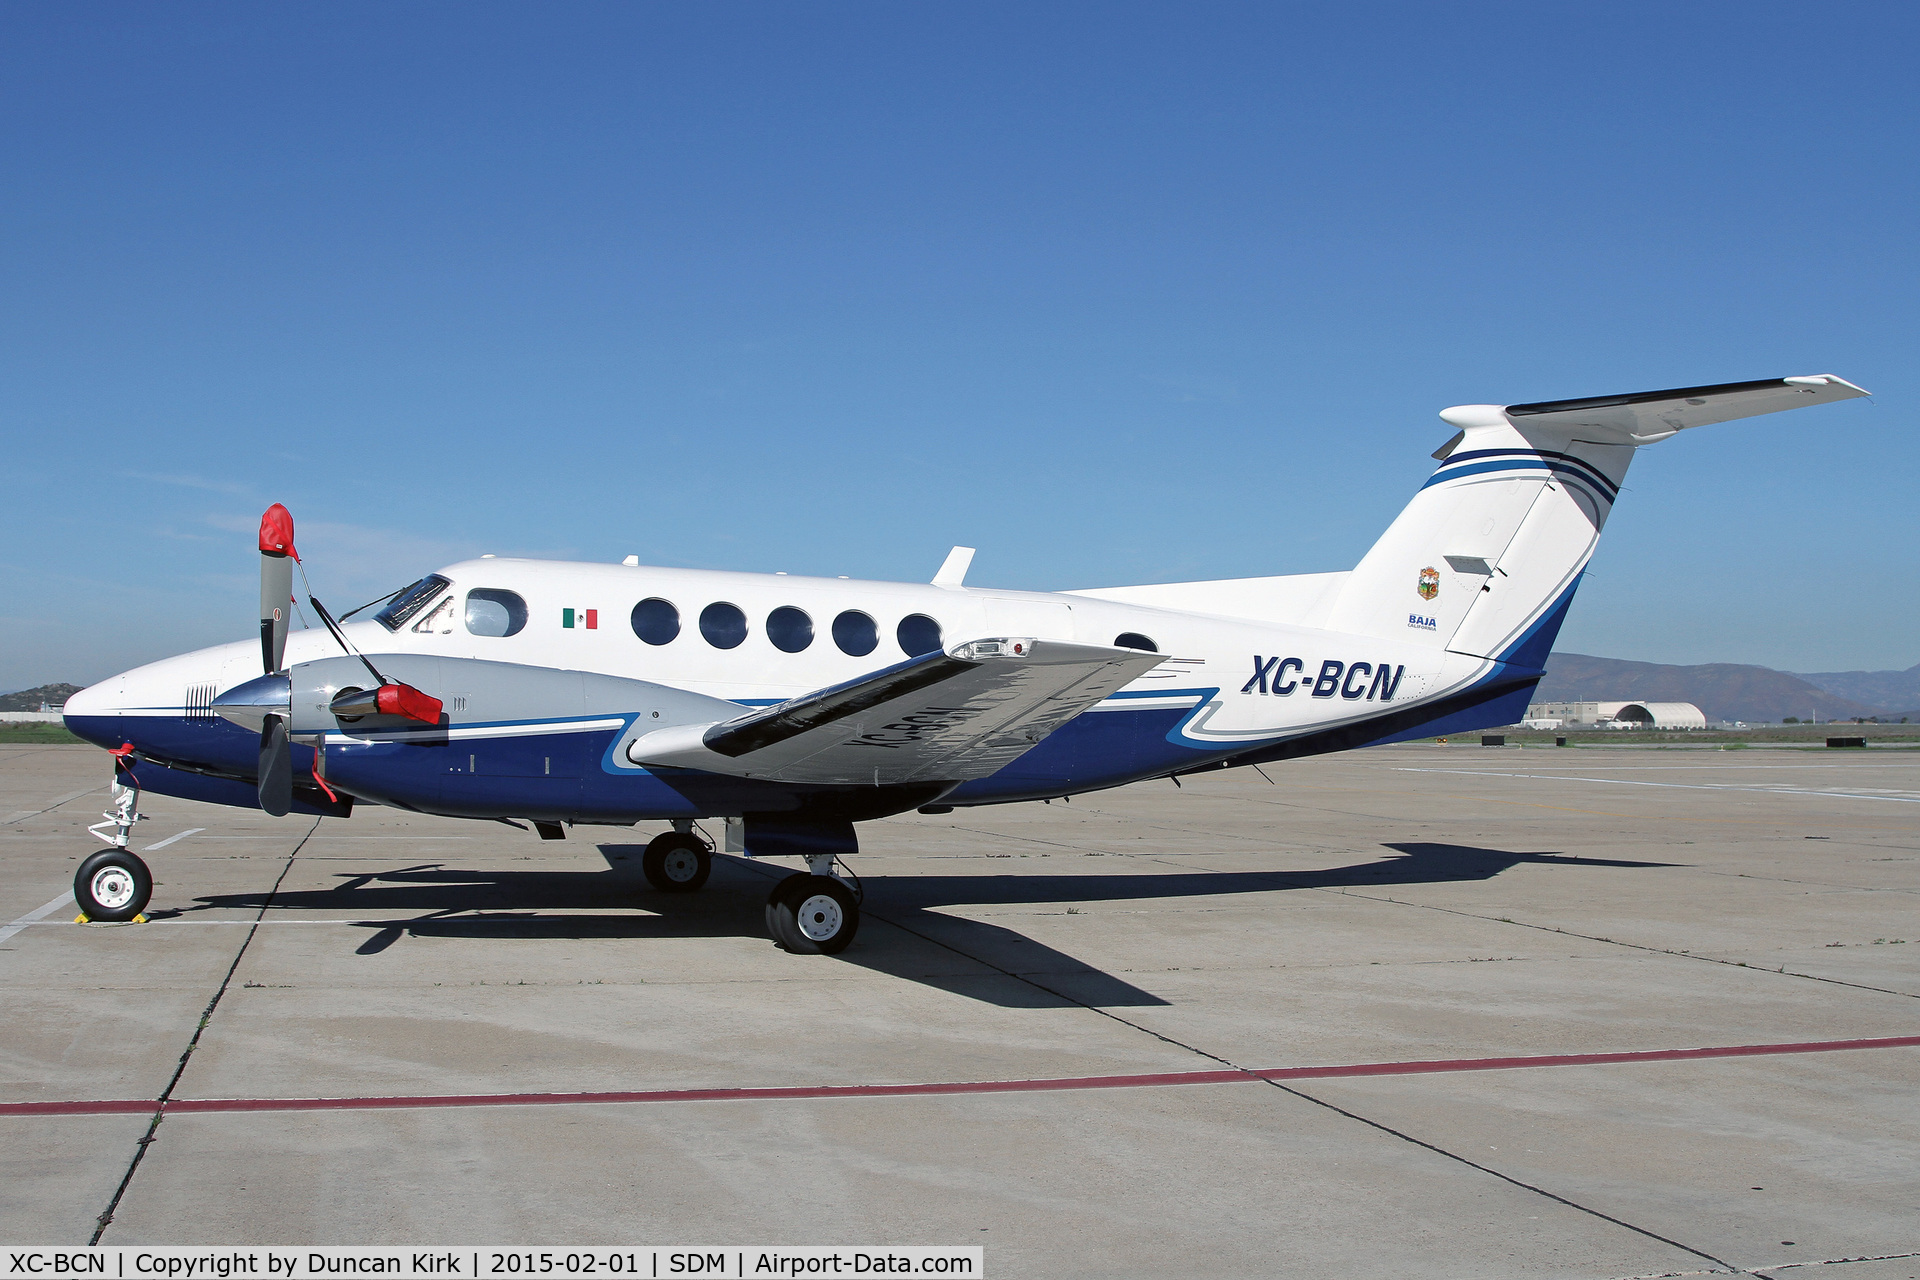 XC-BCN, Beech 200 C/N BB-435, The Governor of the State of Baja's plane